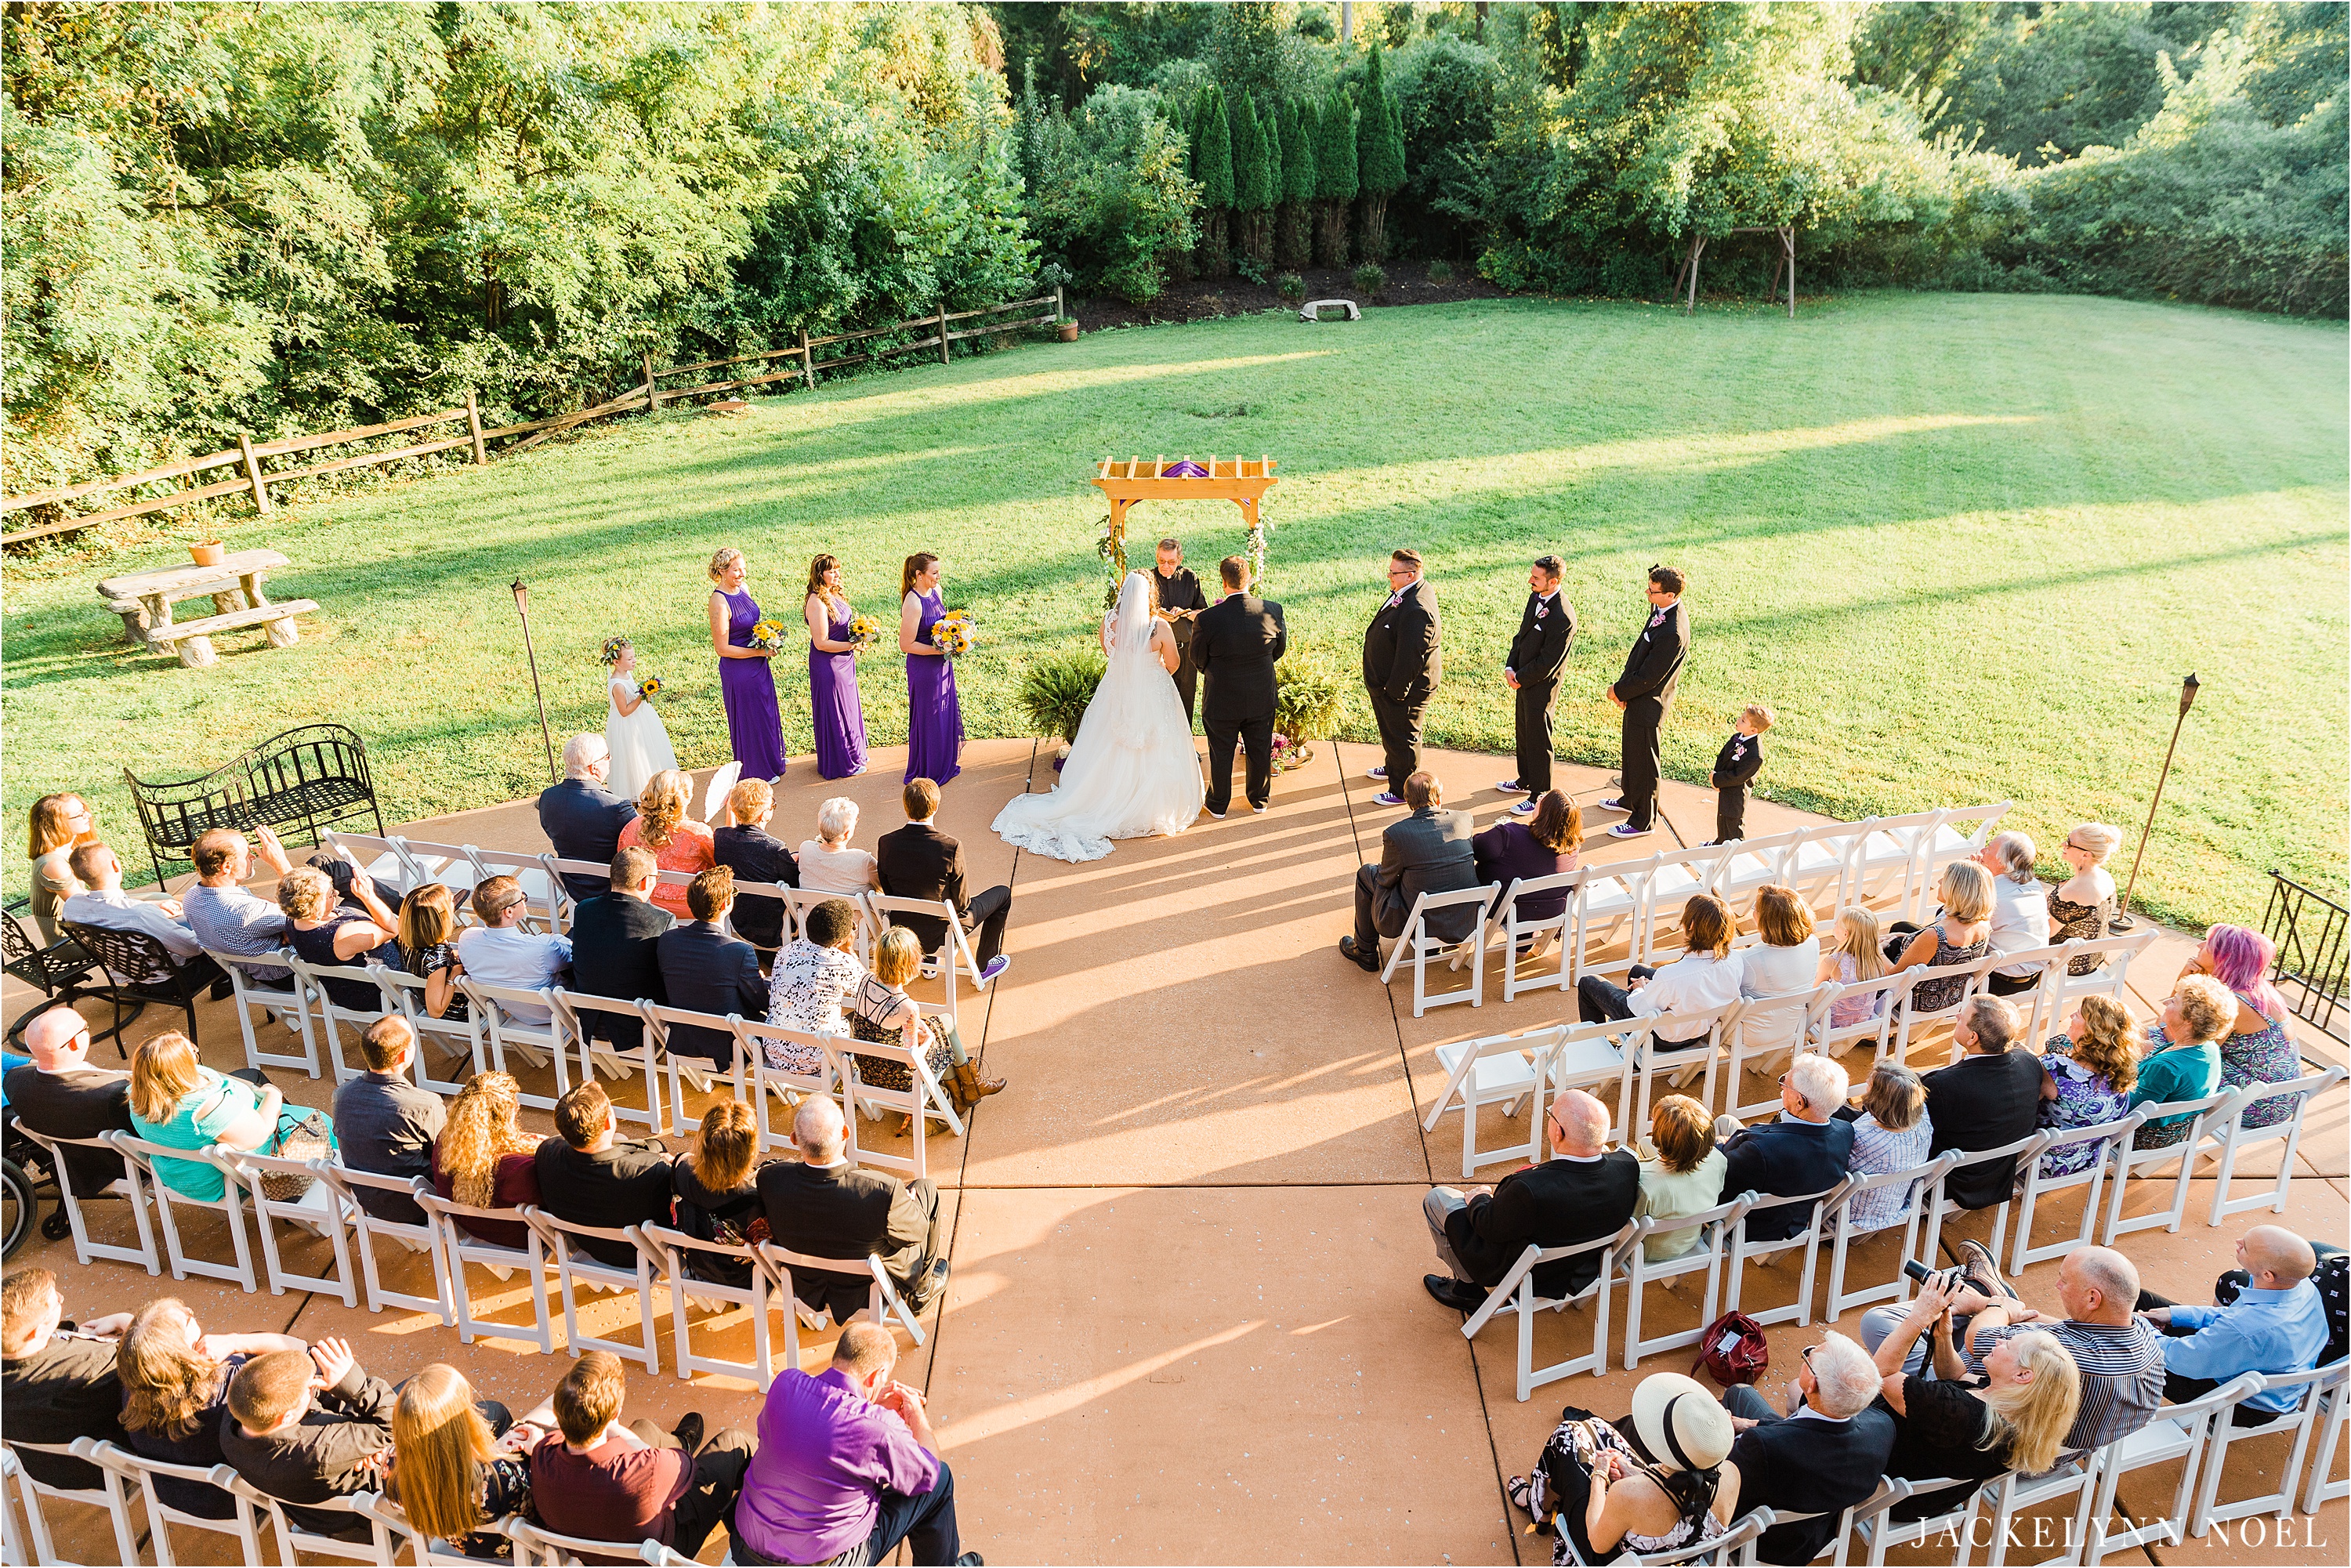 Photo of Dan and Lisa's wedding ceremony from above